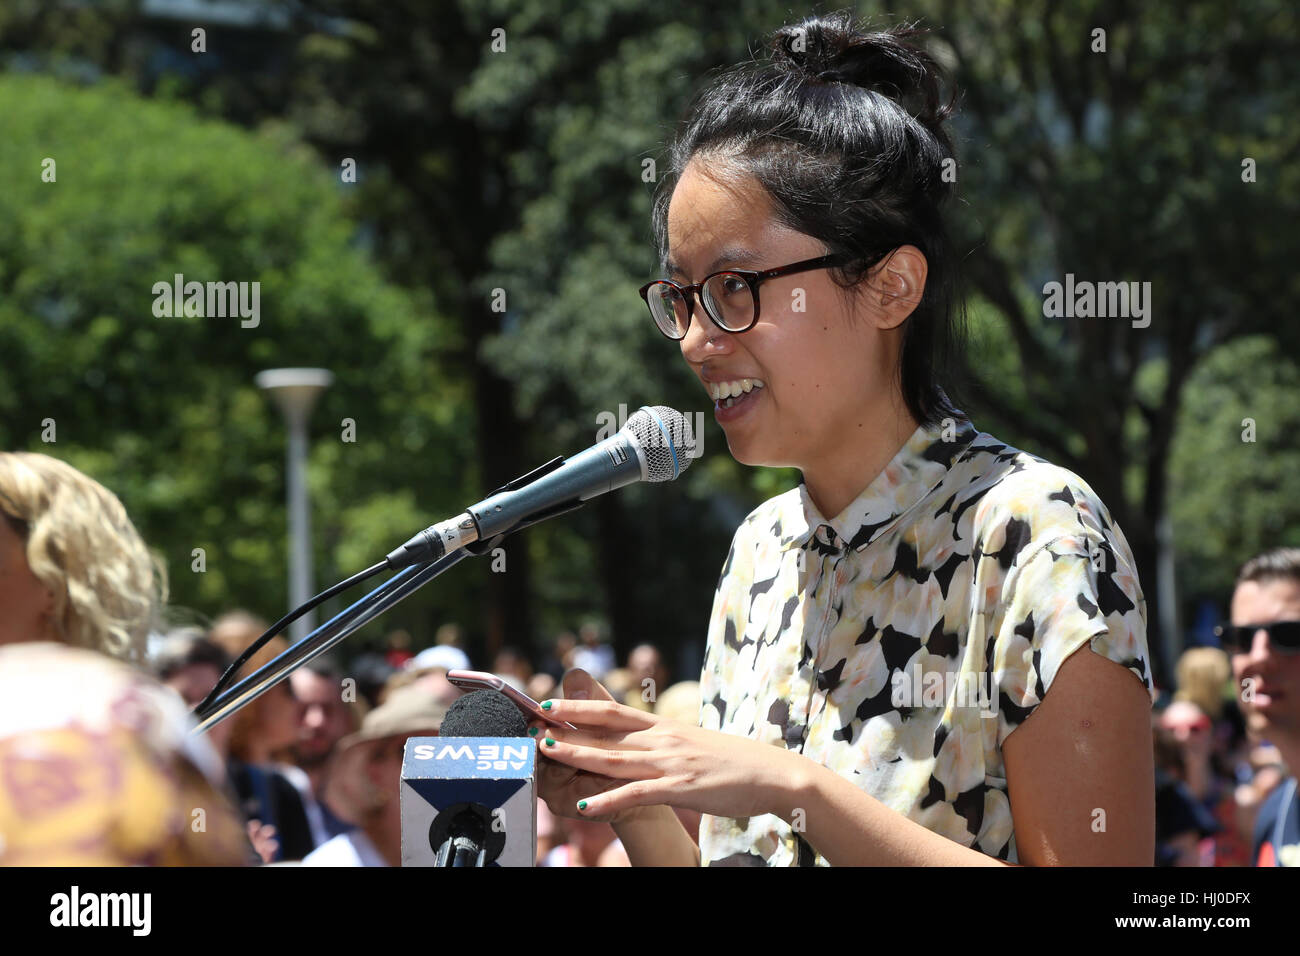 Sydney, Australia. 21 January 2017. Thousands of mainly women gathered in Hyde Park and marched to Martin Place in solidarity with the Women's March movement taking place in Washington, DC and around the world in defence of women’s rights and human rights. Pictured: a feminist speaker at the rally. Credit: © Richard Milnes/Alamy Live News Stock Photo